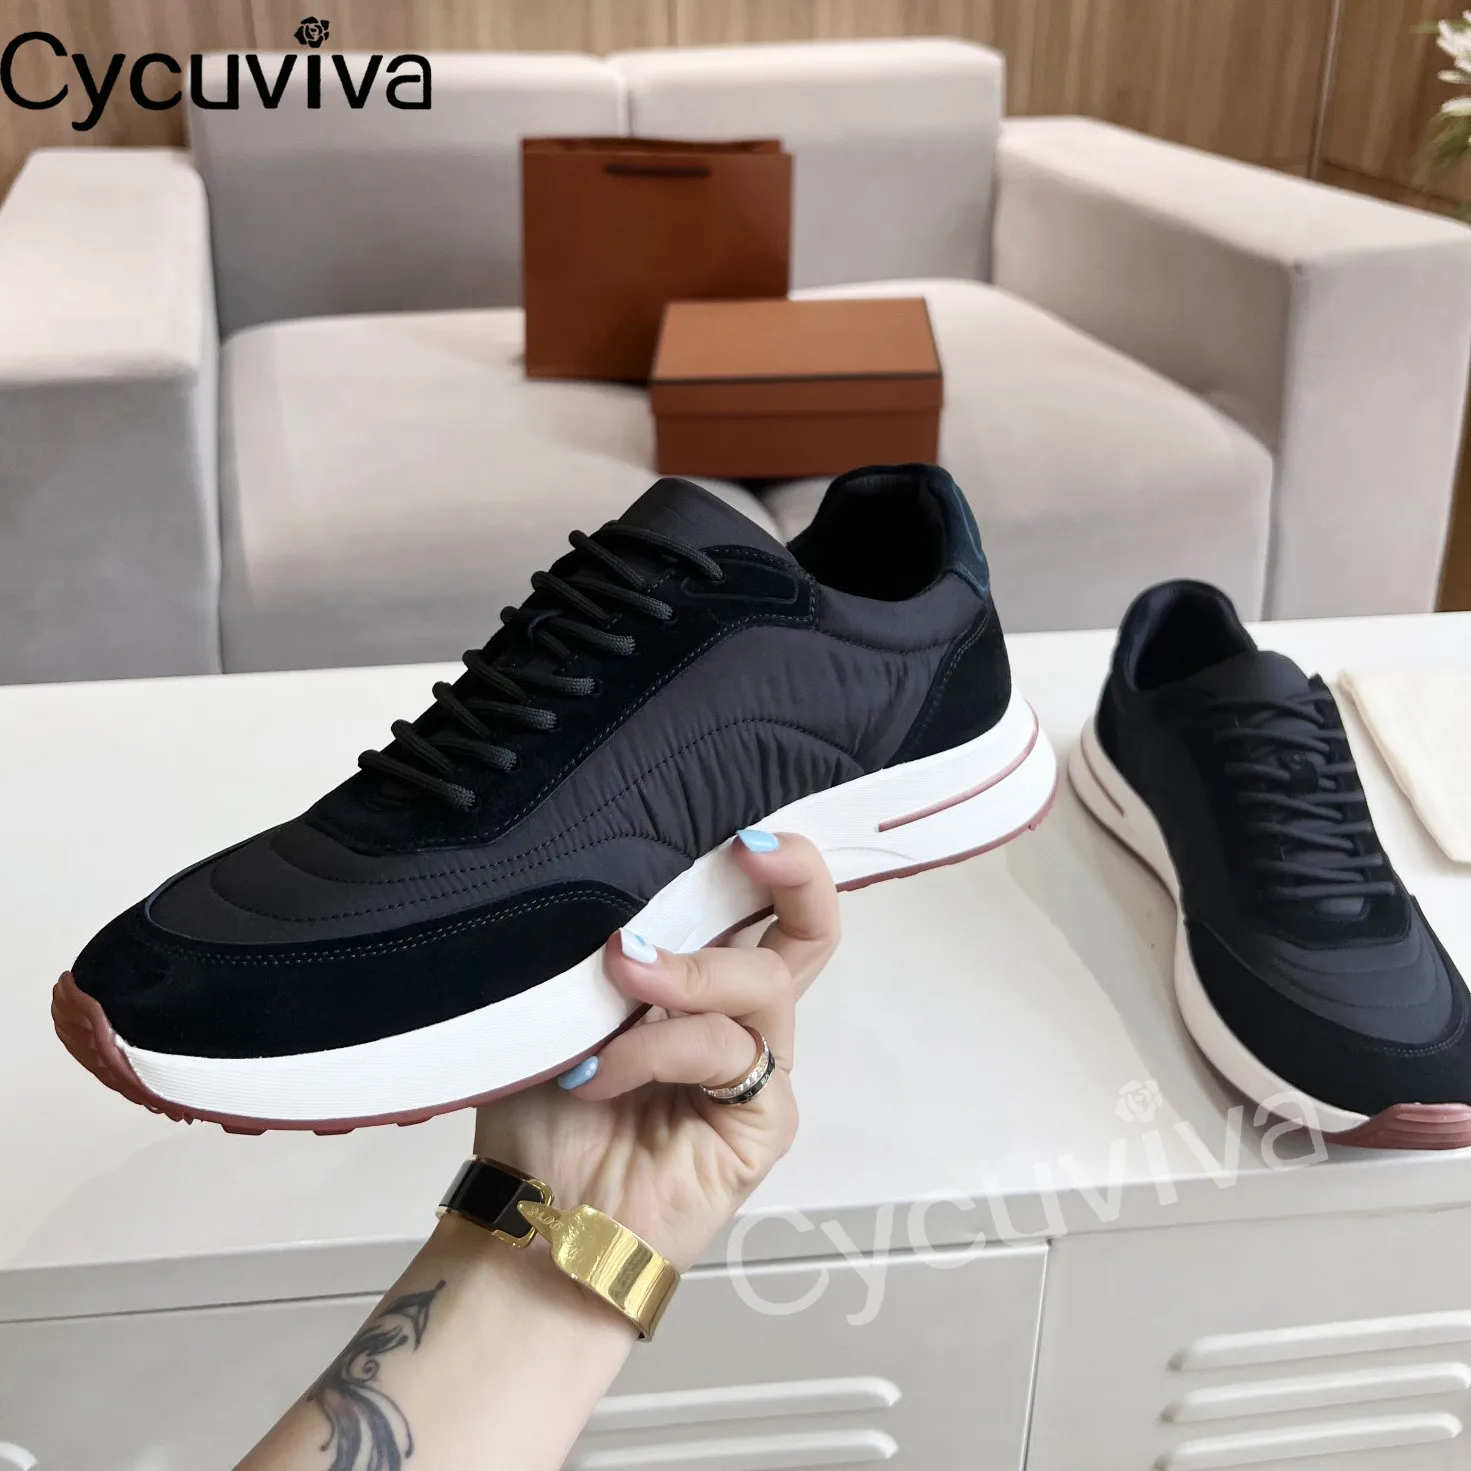 New Summer Walk Sneakers Male Lace Up Platform Flat Casual Shoes For Men... - $206.19